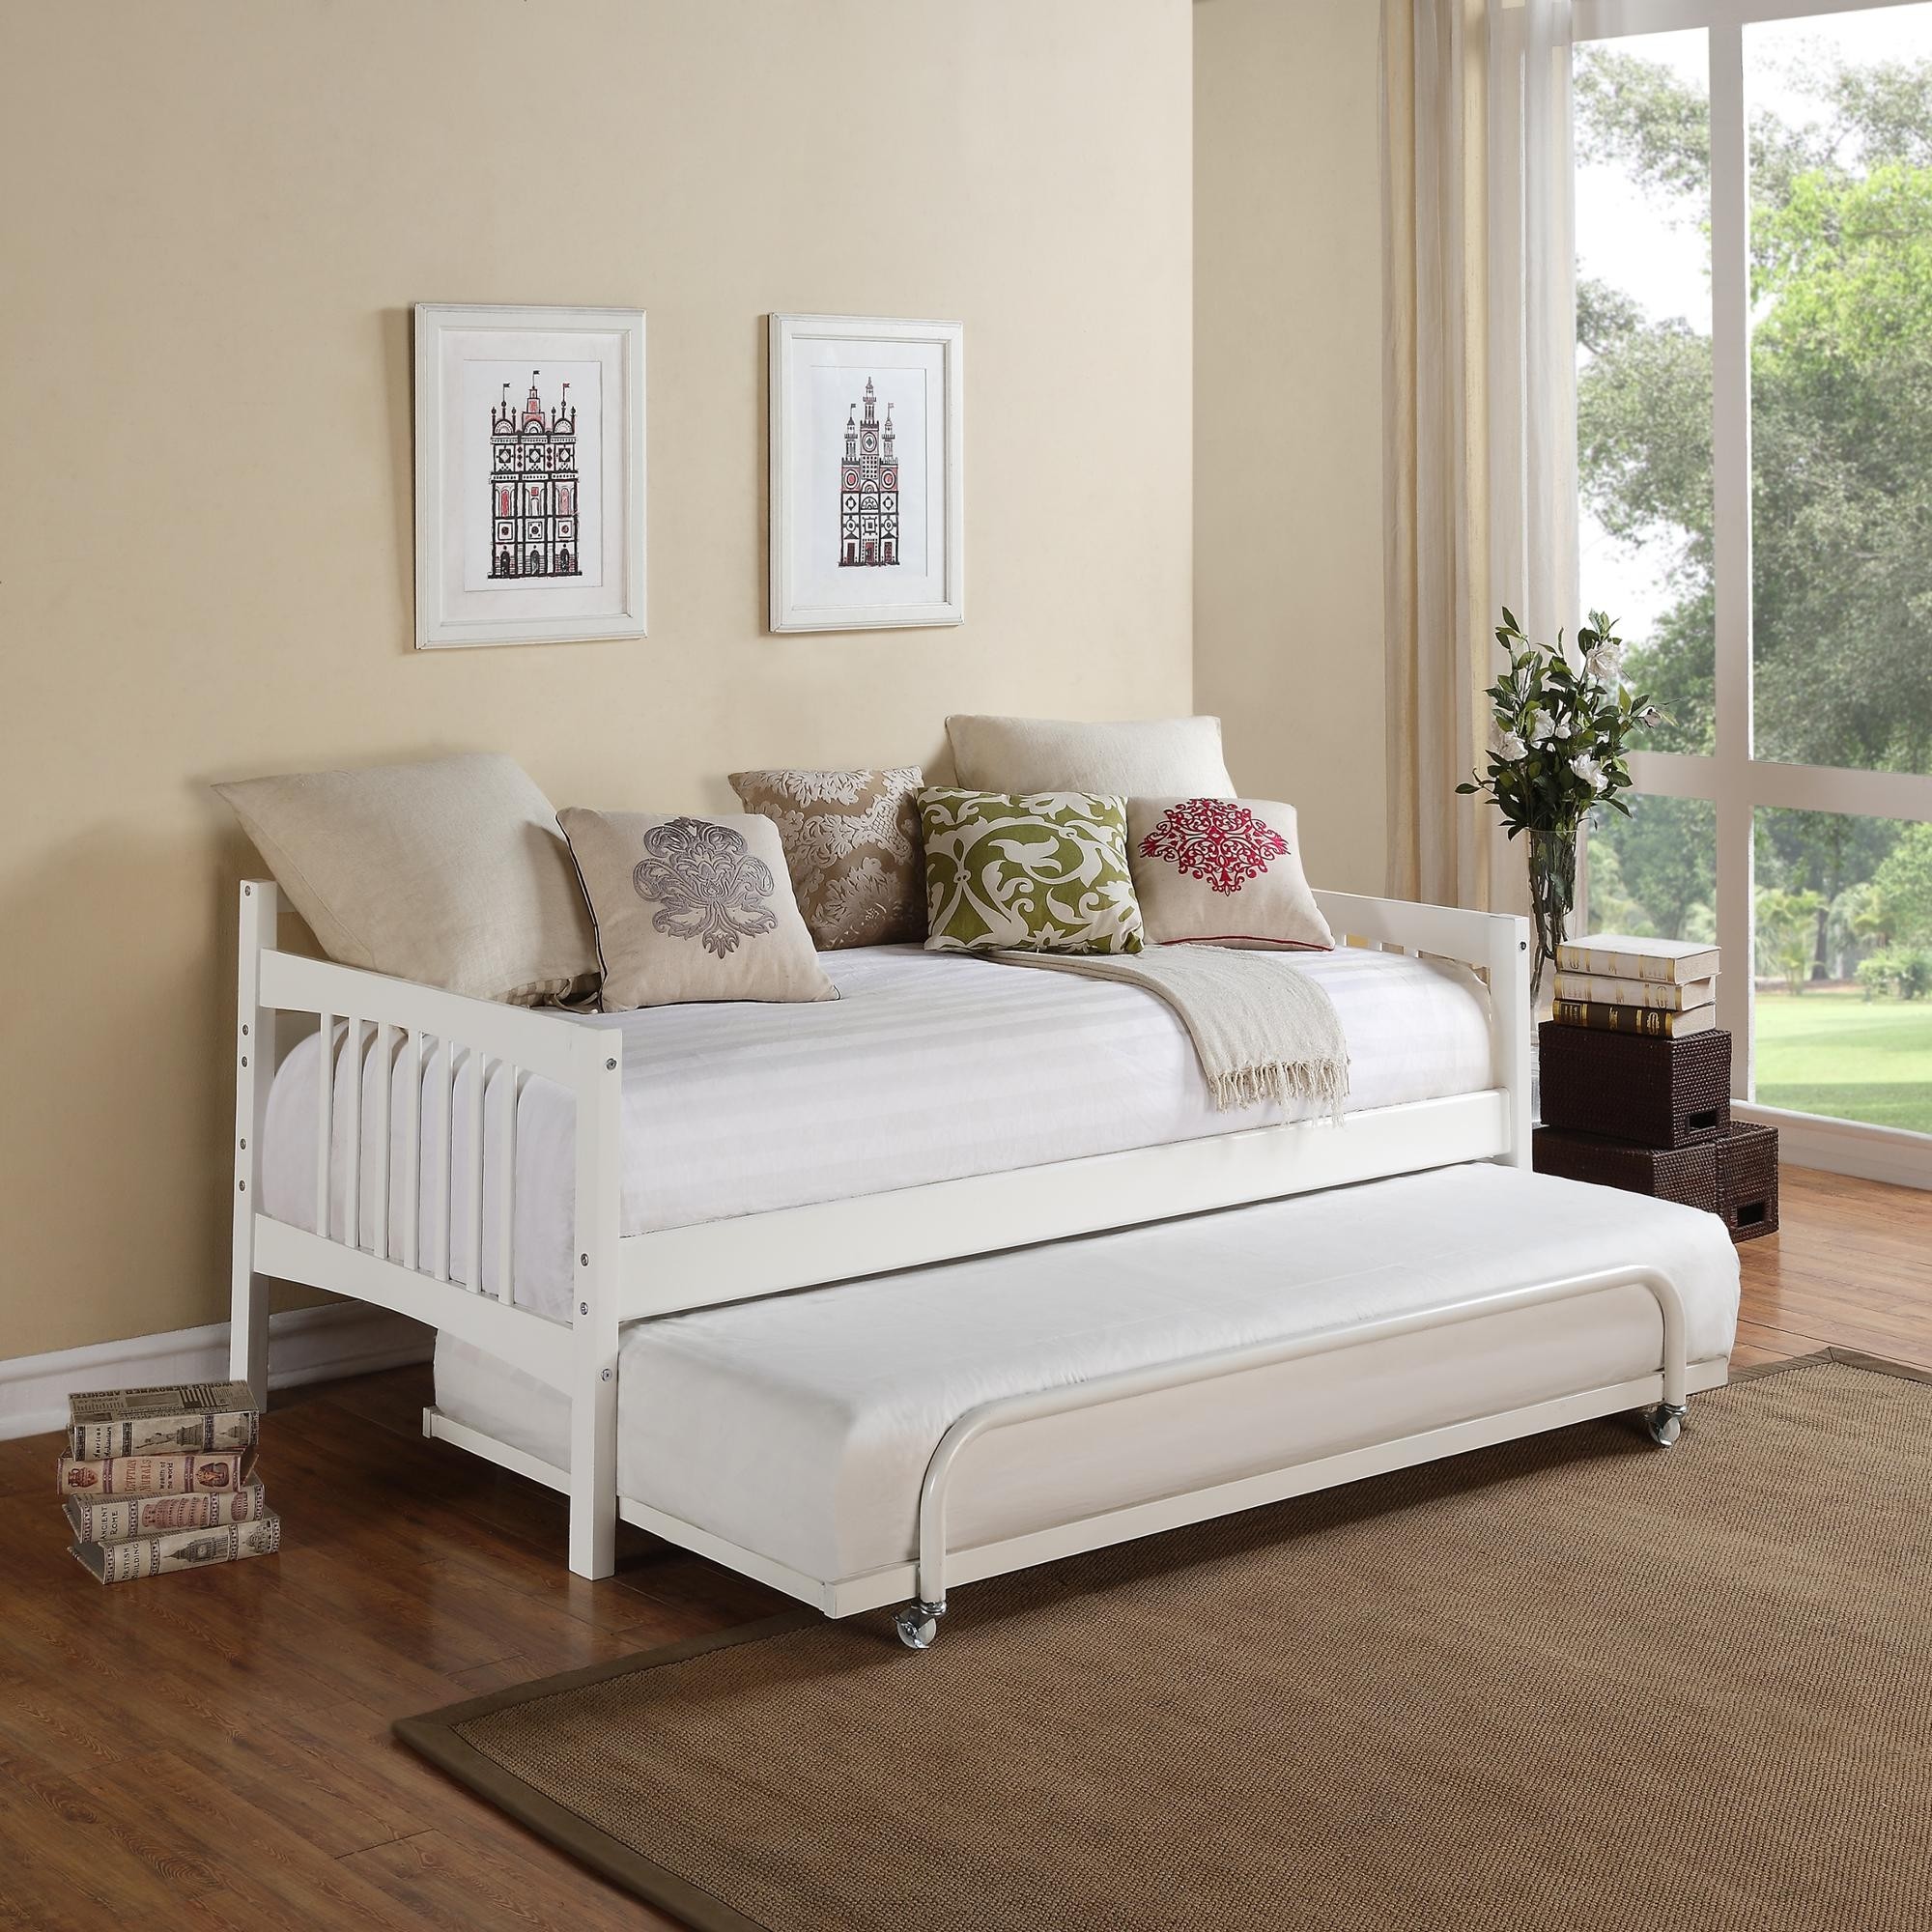 Twin White Daybed Without Trundle w/ Sturdy Durable Solid Wood Frame Ideal for a Guest Room, Den, Studio Apartment or Small Living Space